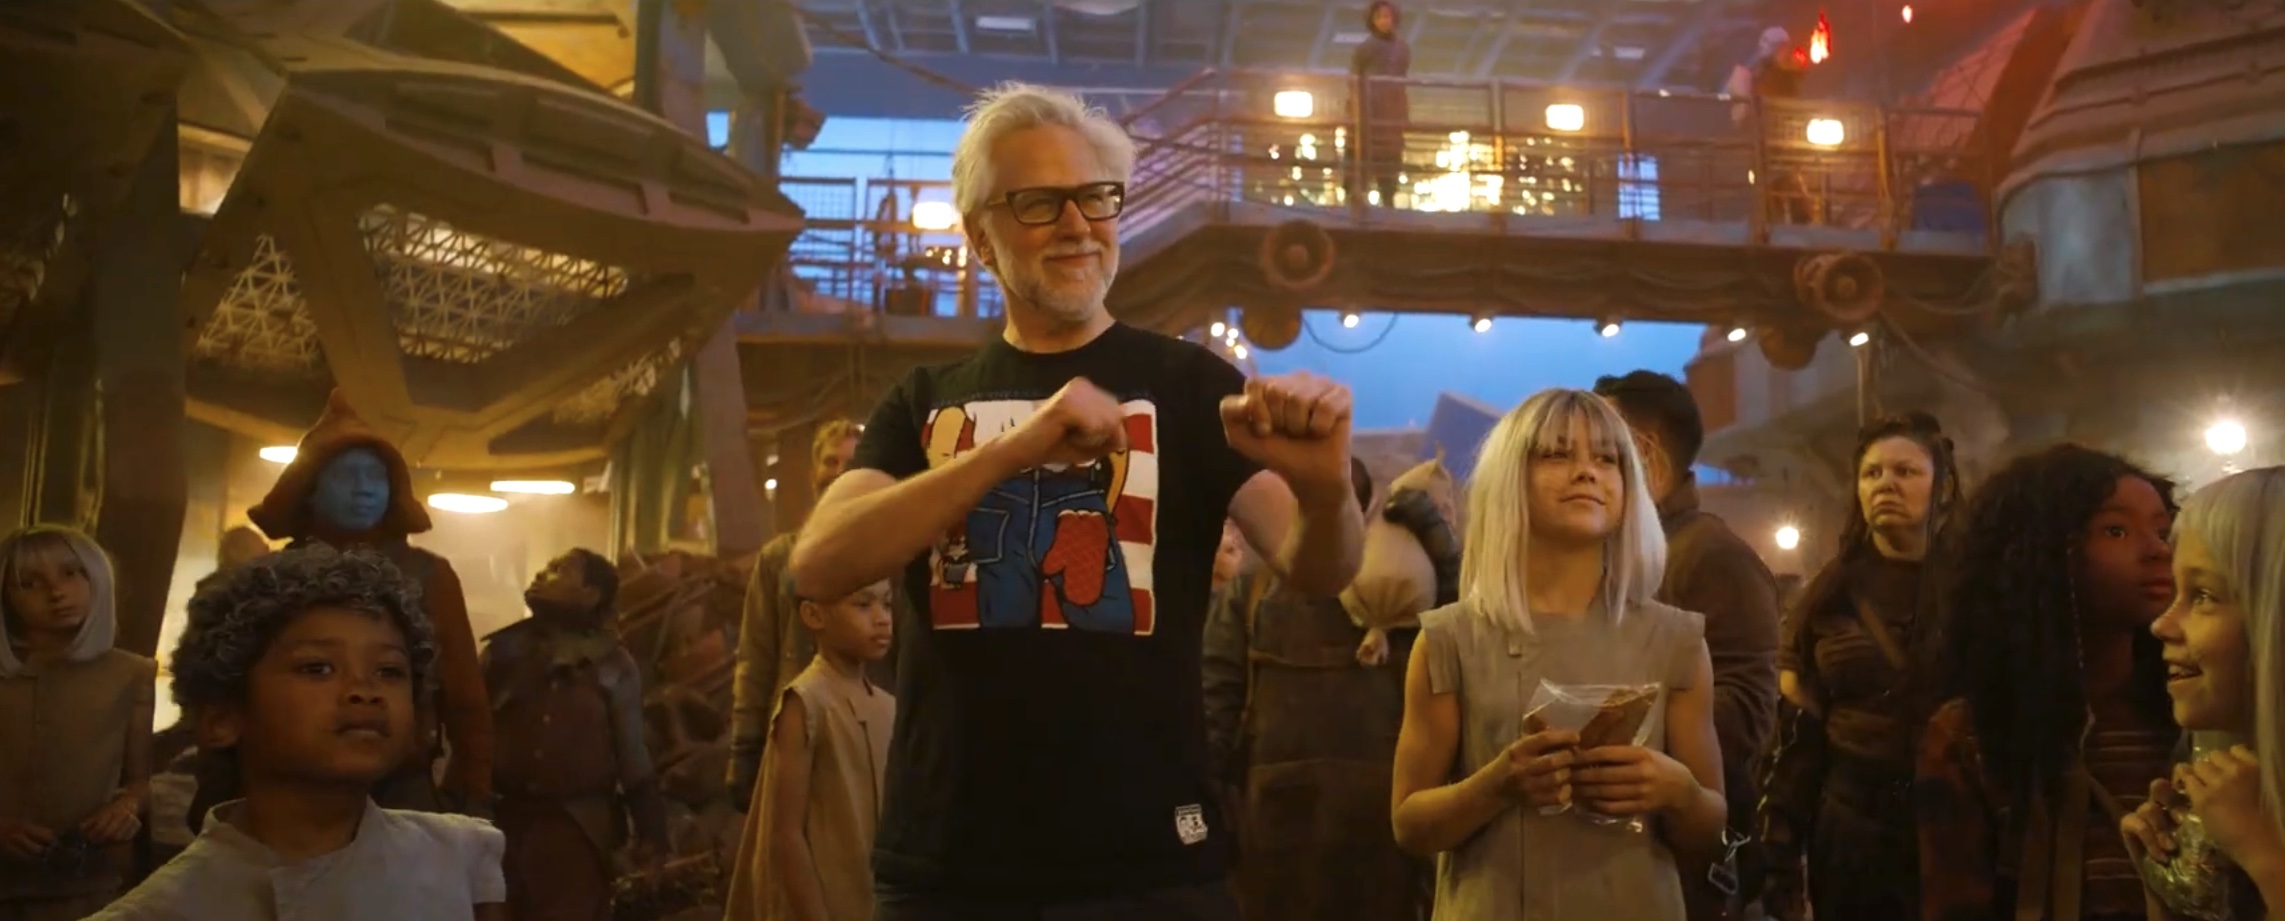 James Gunn dancing on the set of Guardians of the Galaxy 3 in the scene where Groot dances with Knowhere kids